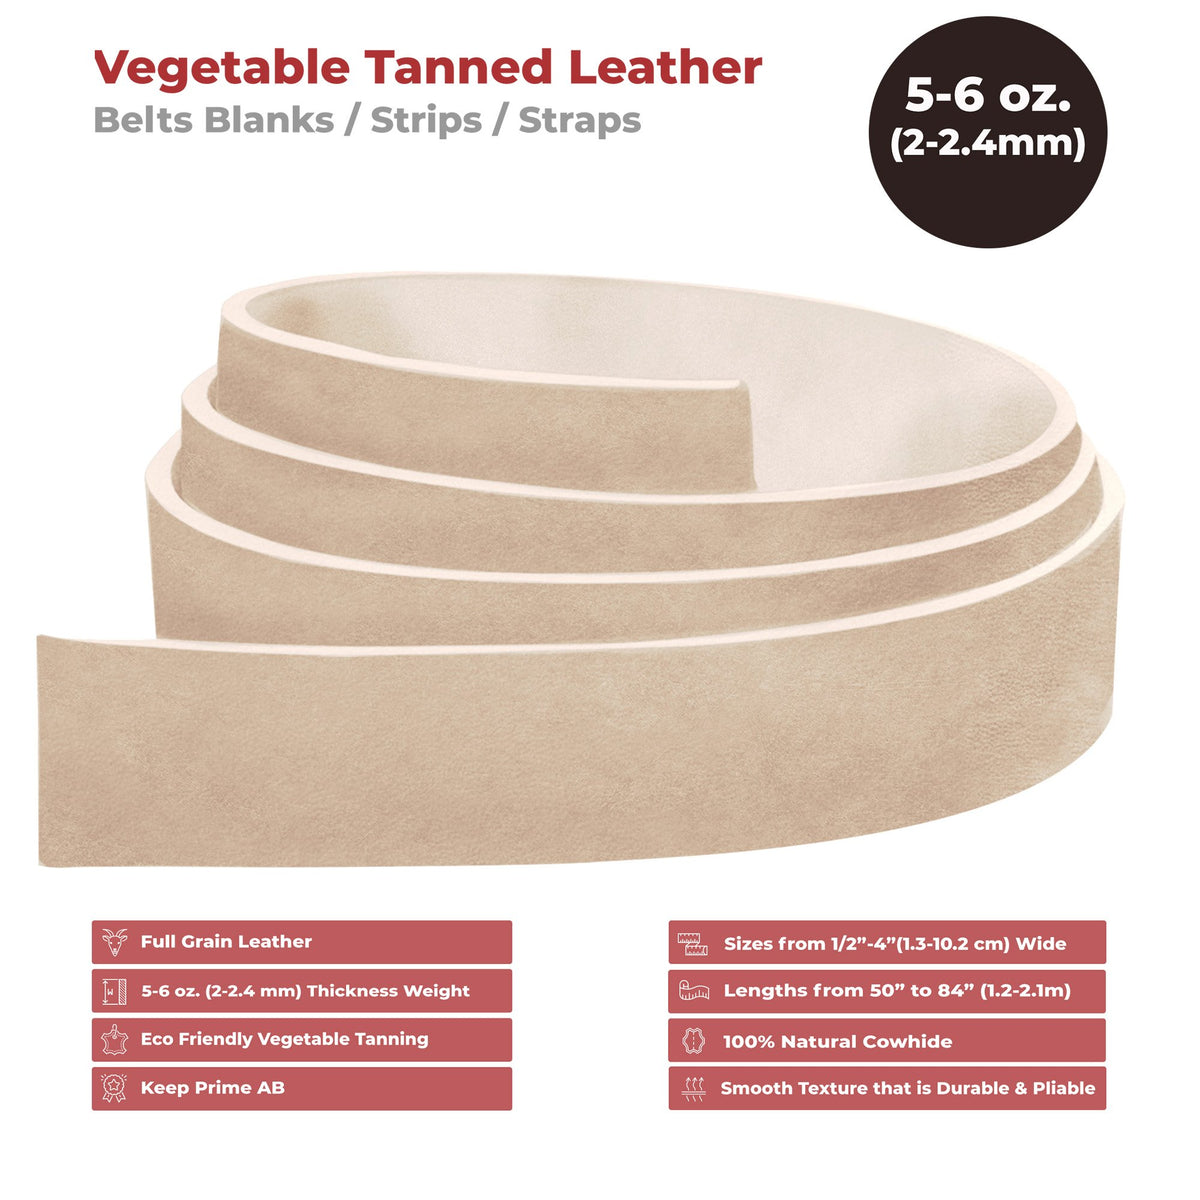 Natural Cowhide Leather Belt Blanks with Snaps 8-9-oz (3.5mm-4.0mm